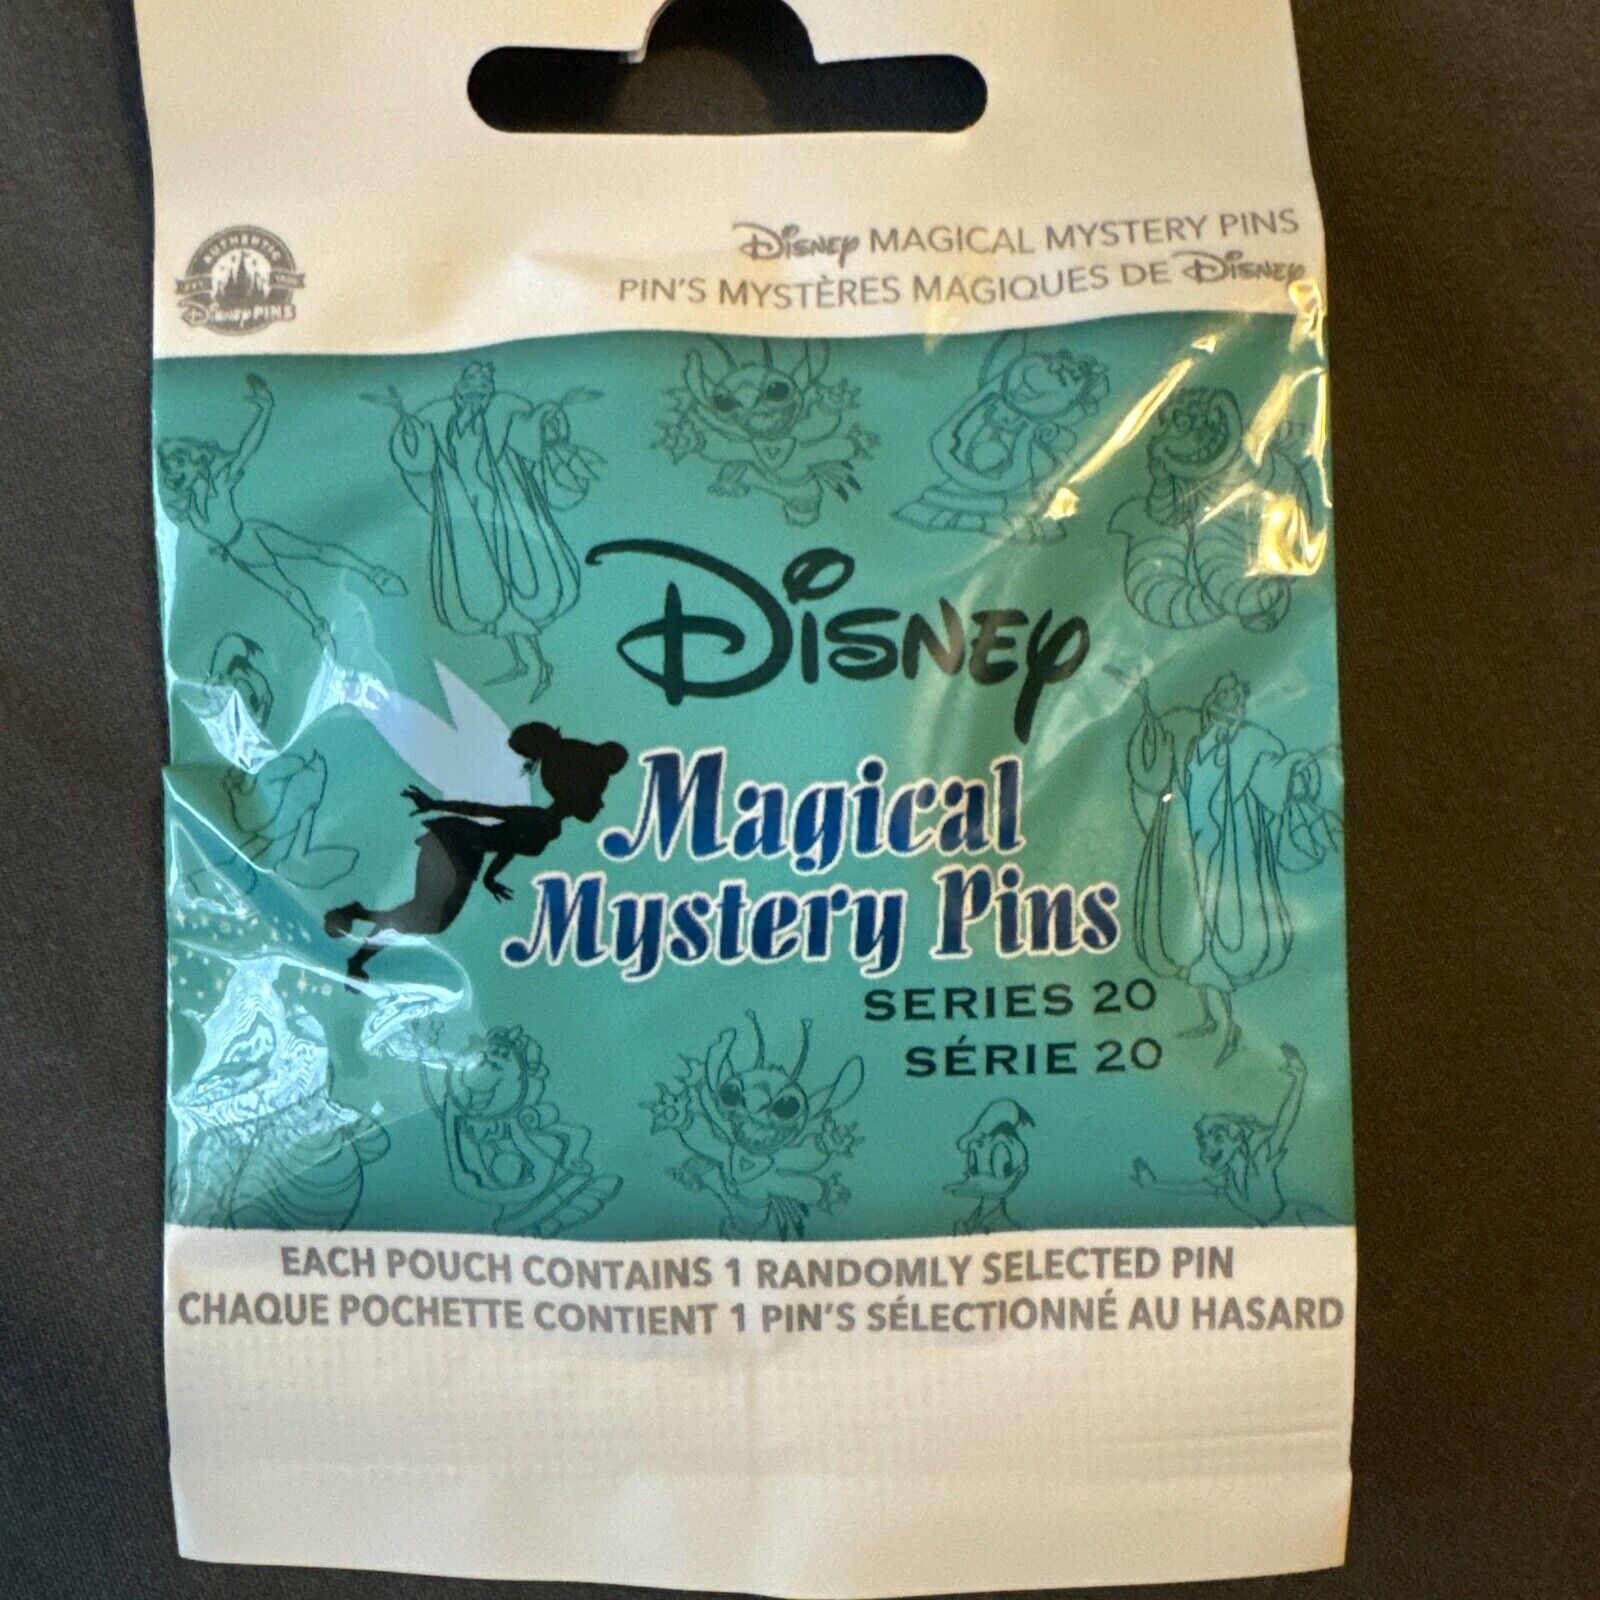 Magical Mystery Pins Series 20 Lunch Boxes Blind Pack SEALED 1 Pin Disney